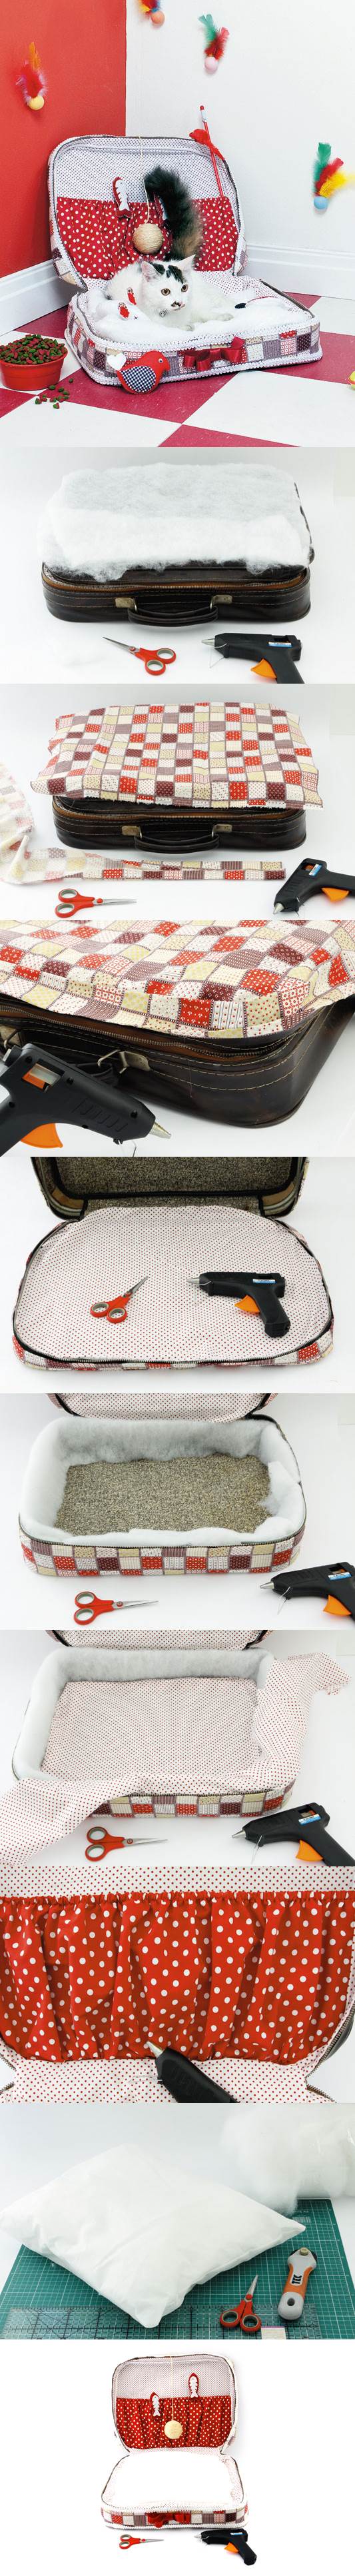 DIY Cat Bed from Old Suitcase 2